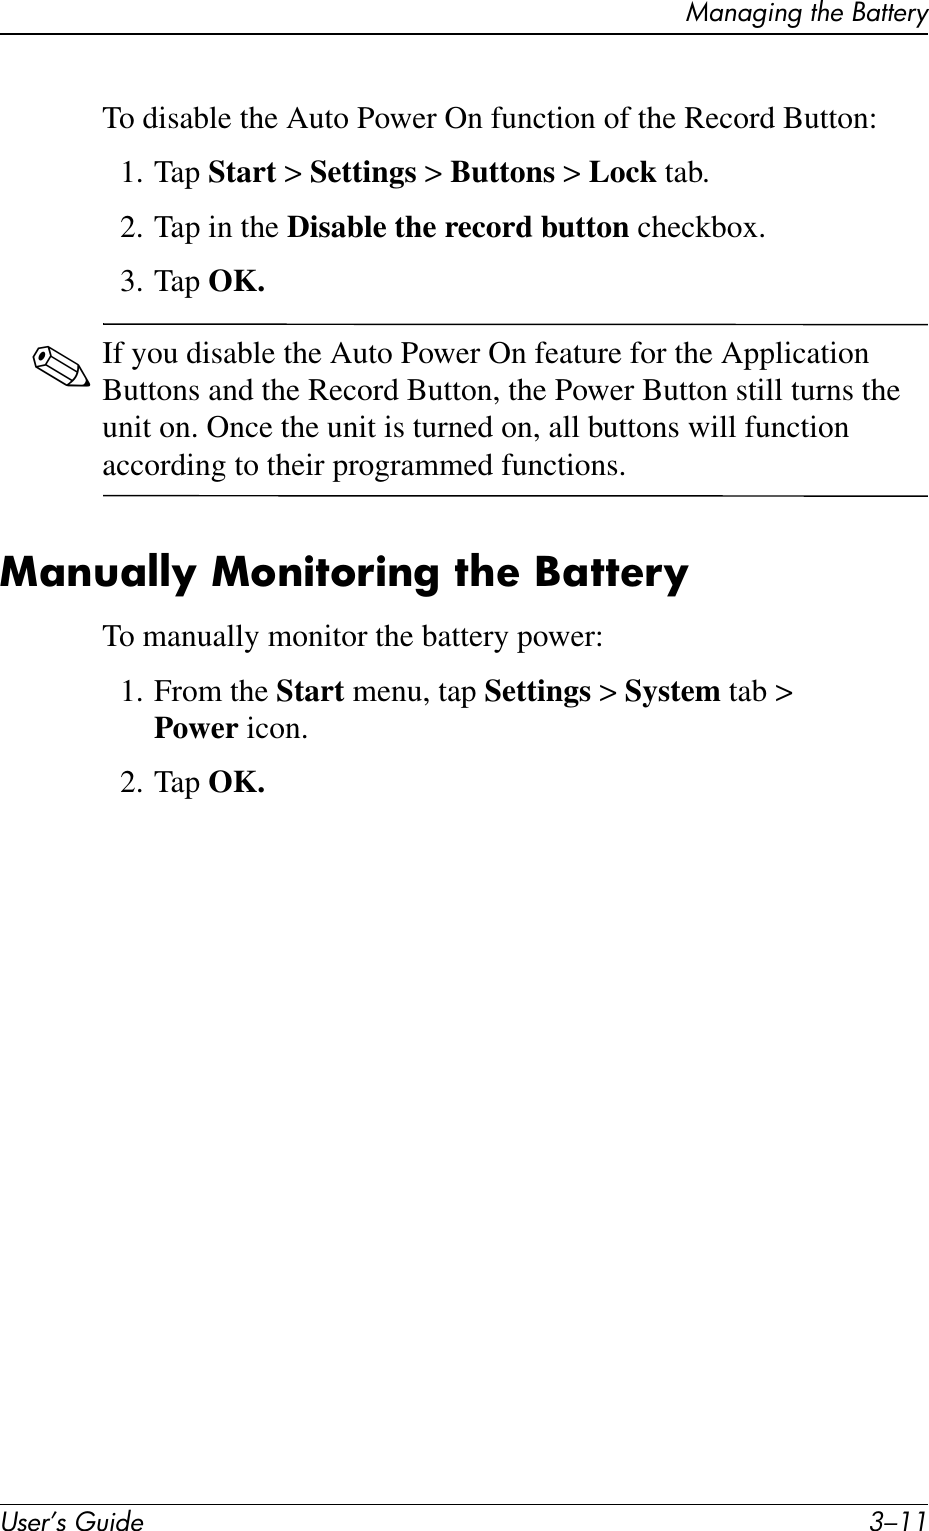 Managing the BatteryUser’s Guide 3–11To disable the Auto Power On function of the Record Button:1. Tap Start &gt; Settings &gt; Buttons &gt; Lock tab.2. Tap in the Disable the record button checkbox.3. Tap OK.✎If you disable the Auto Power On feature for the Application Buttons and the Record Button, the Power Button still turns the unit on. Once the unit is turned on, all buttons will function according to their programmed functions.Manually Monitoring the BatteryTo manually monitor the battery power:1. From the Start menu, tap Settings &gt; System tab &gt; Power icon.2. Tap OK.